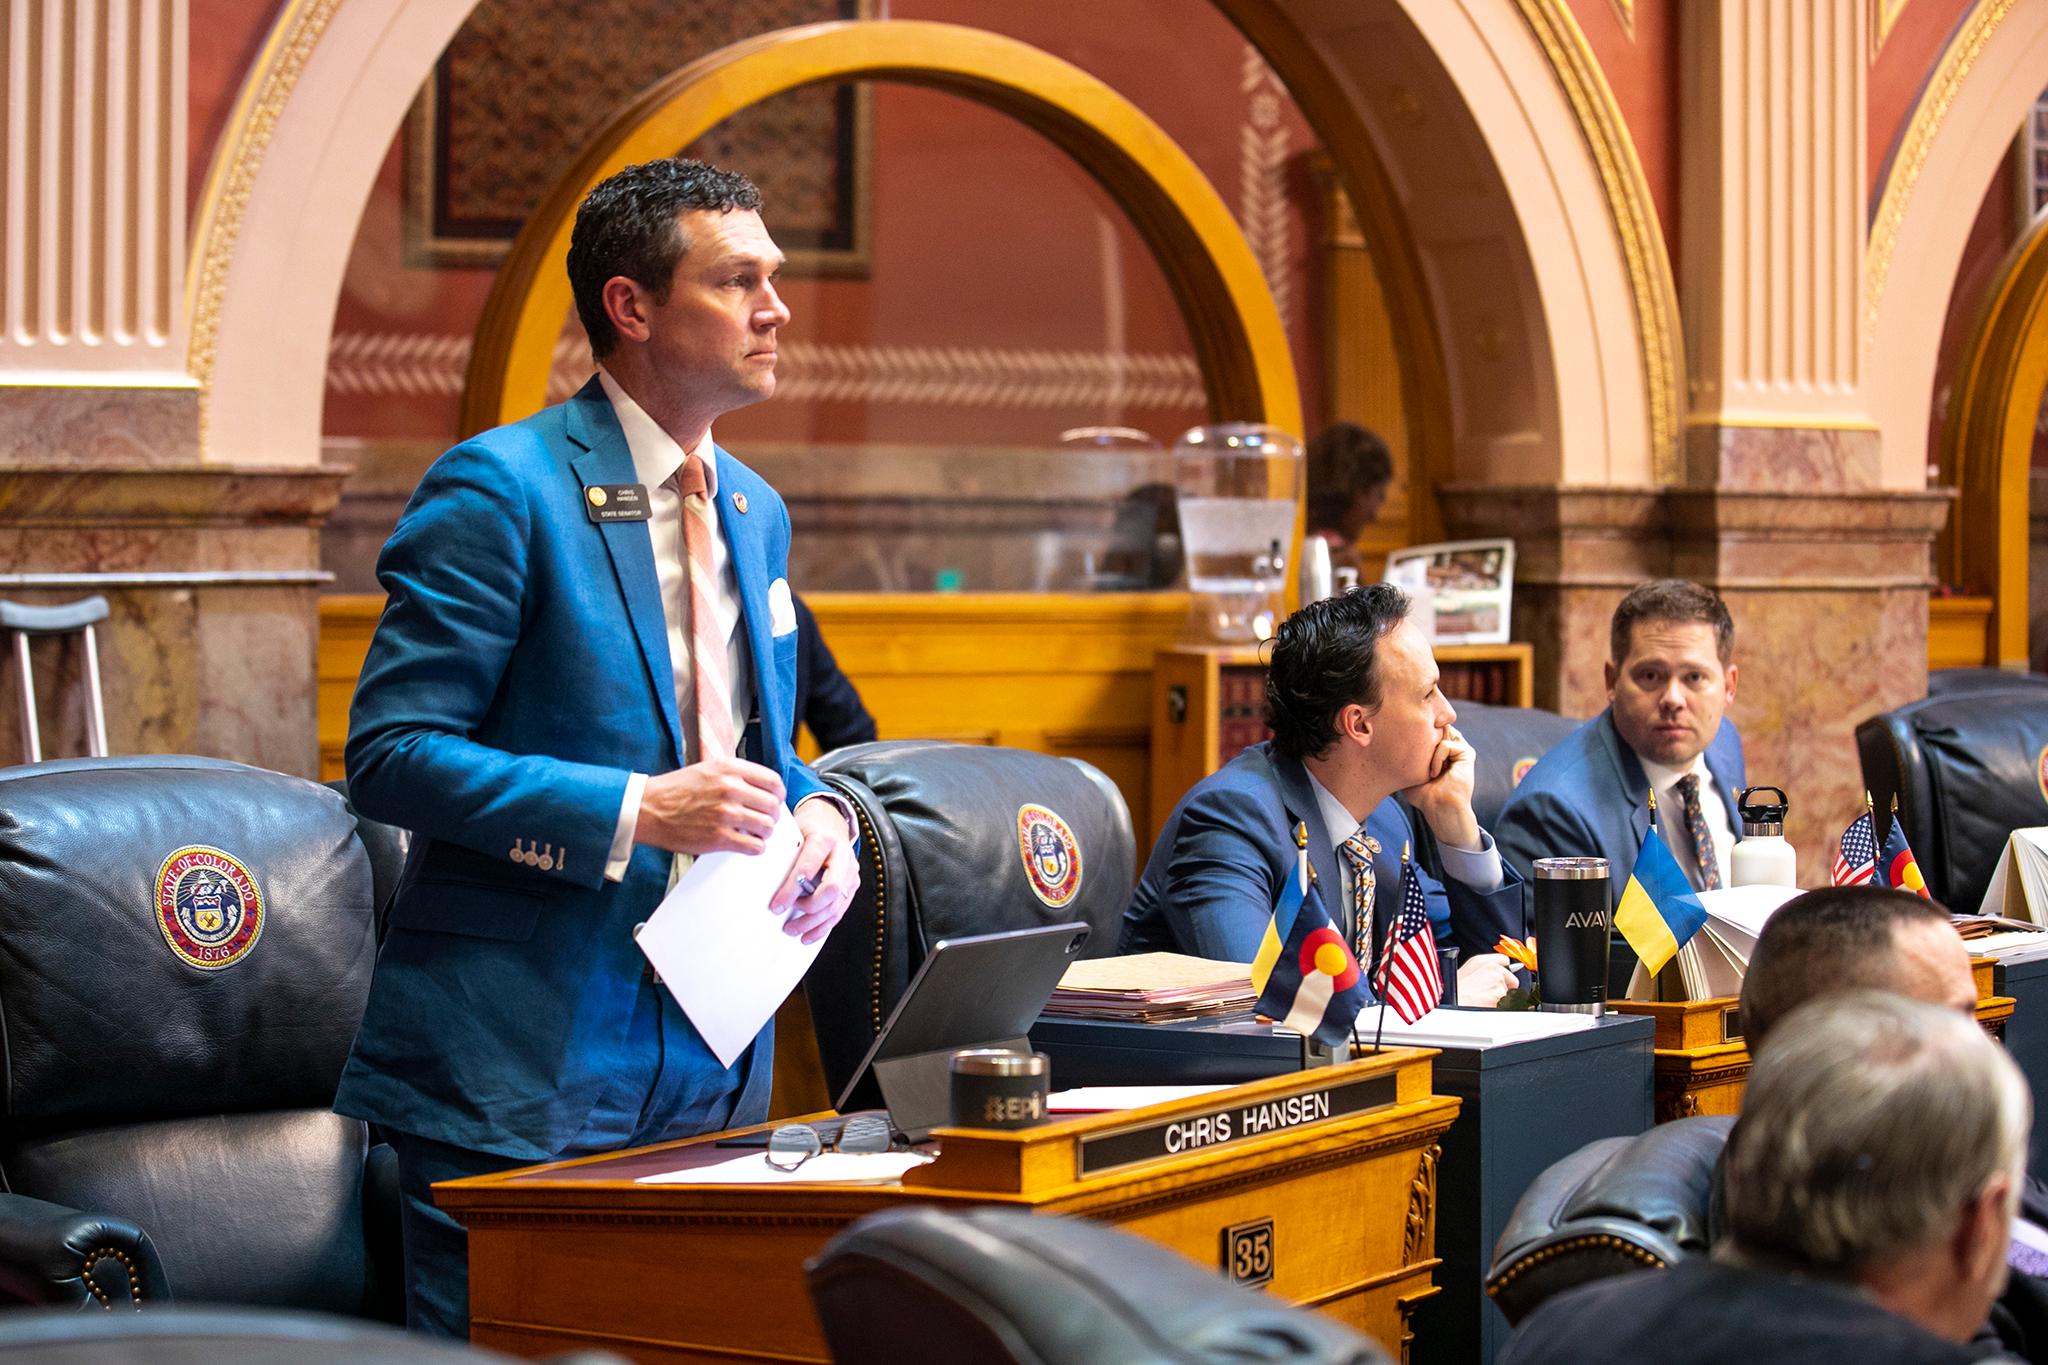 A man in a blue suit stands behind a desk in the Colorado Senate chamber, with two men seated at other desks beside him.